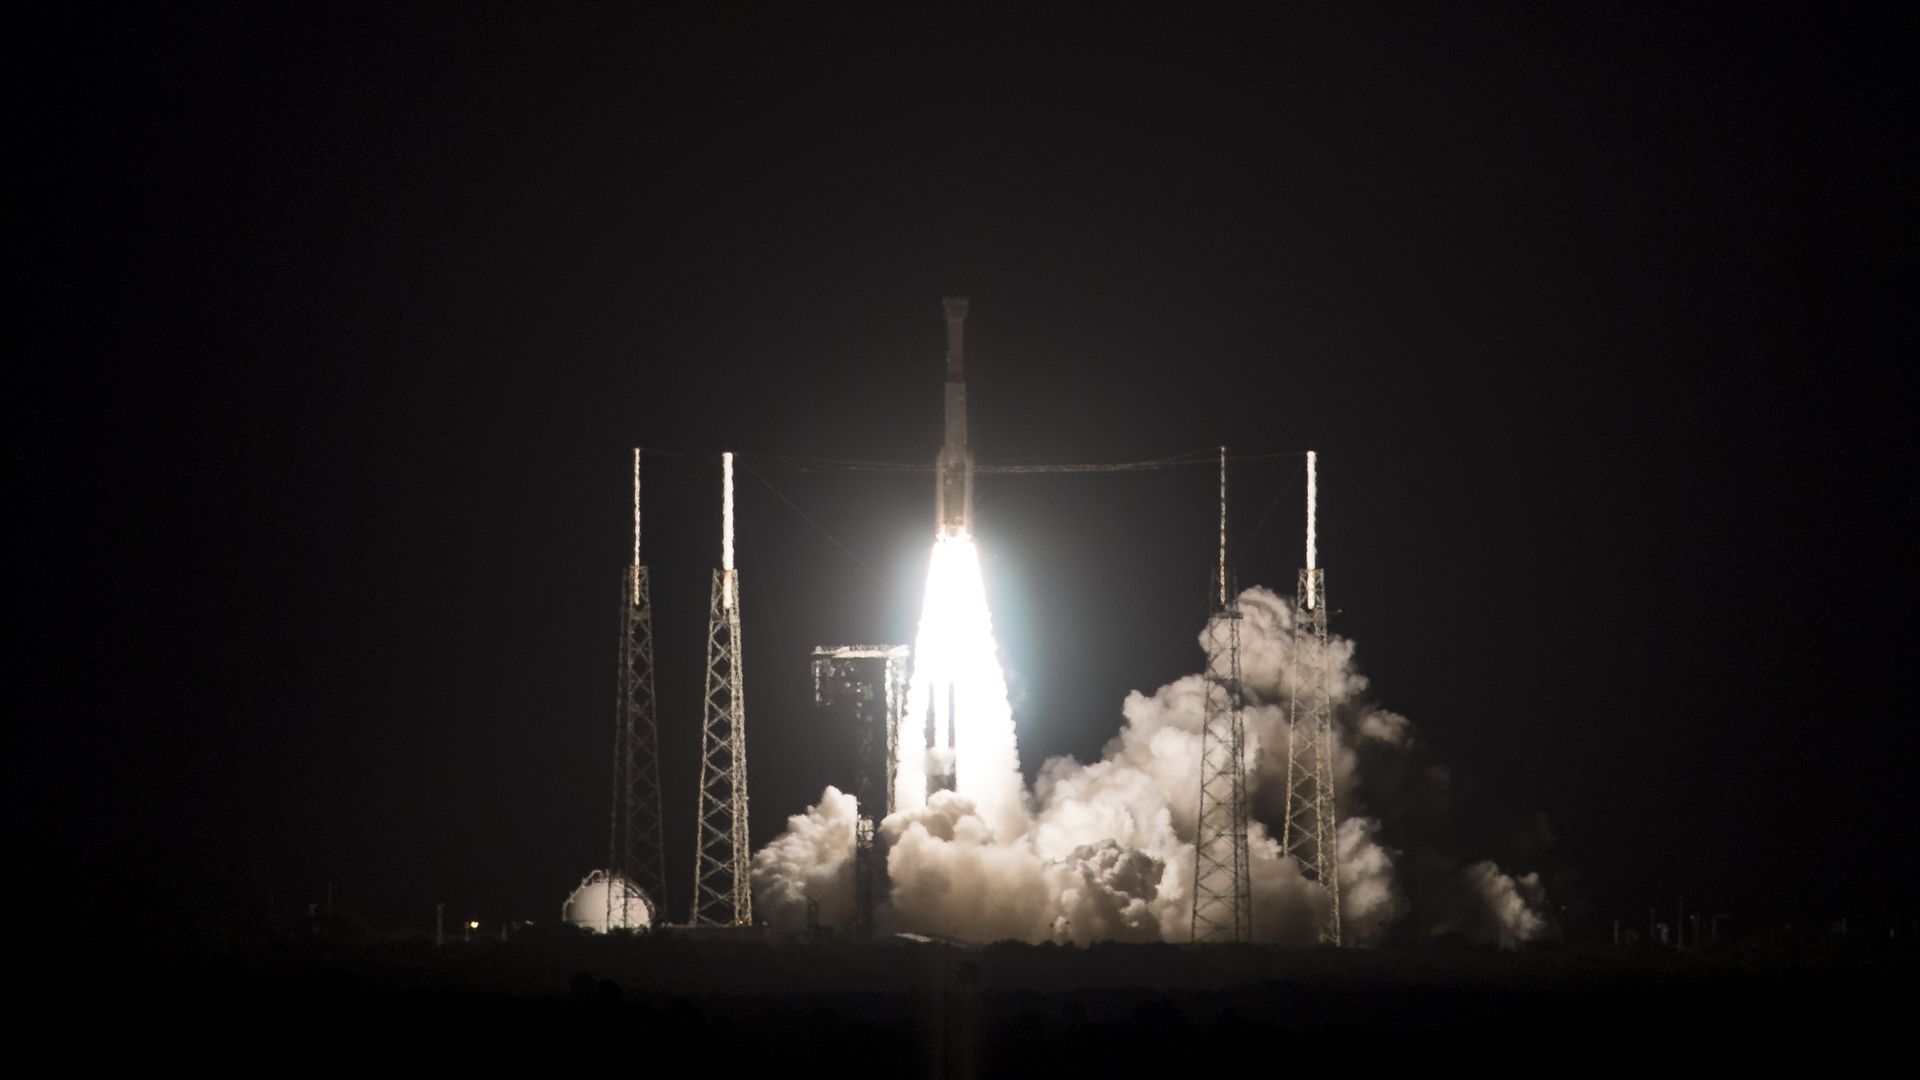 A United Launch Alliance Atlas V rocket with Boeings CST-100 Starliner spacecraft launches from Space Launch Complex 41, Friday, Dec. 20, 2019, at Cape Canaveral Air Force Station in Florida.